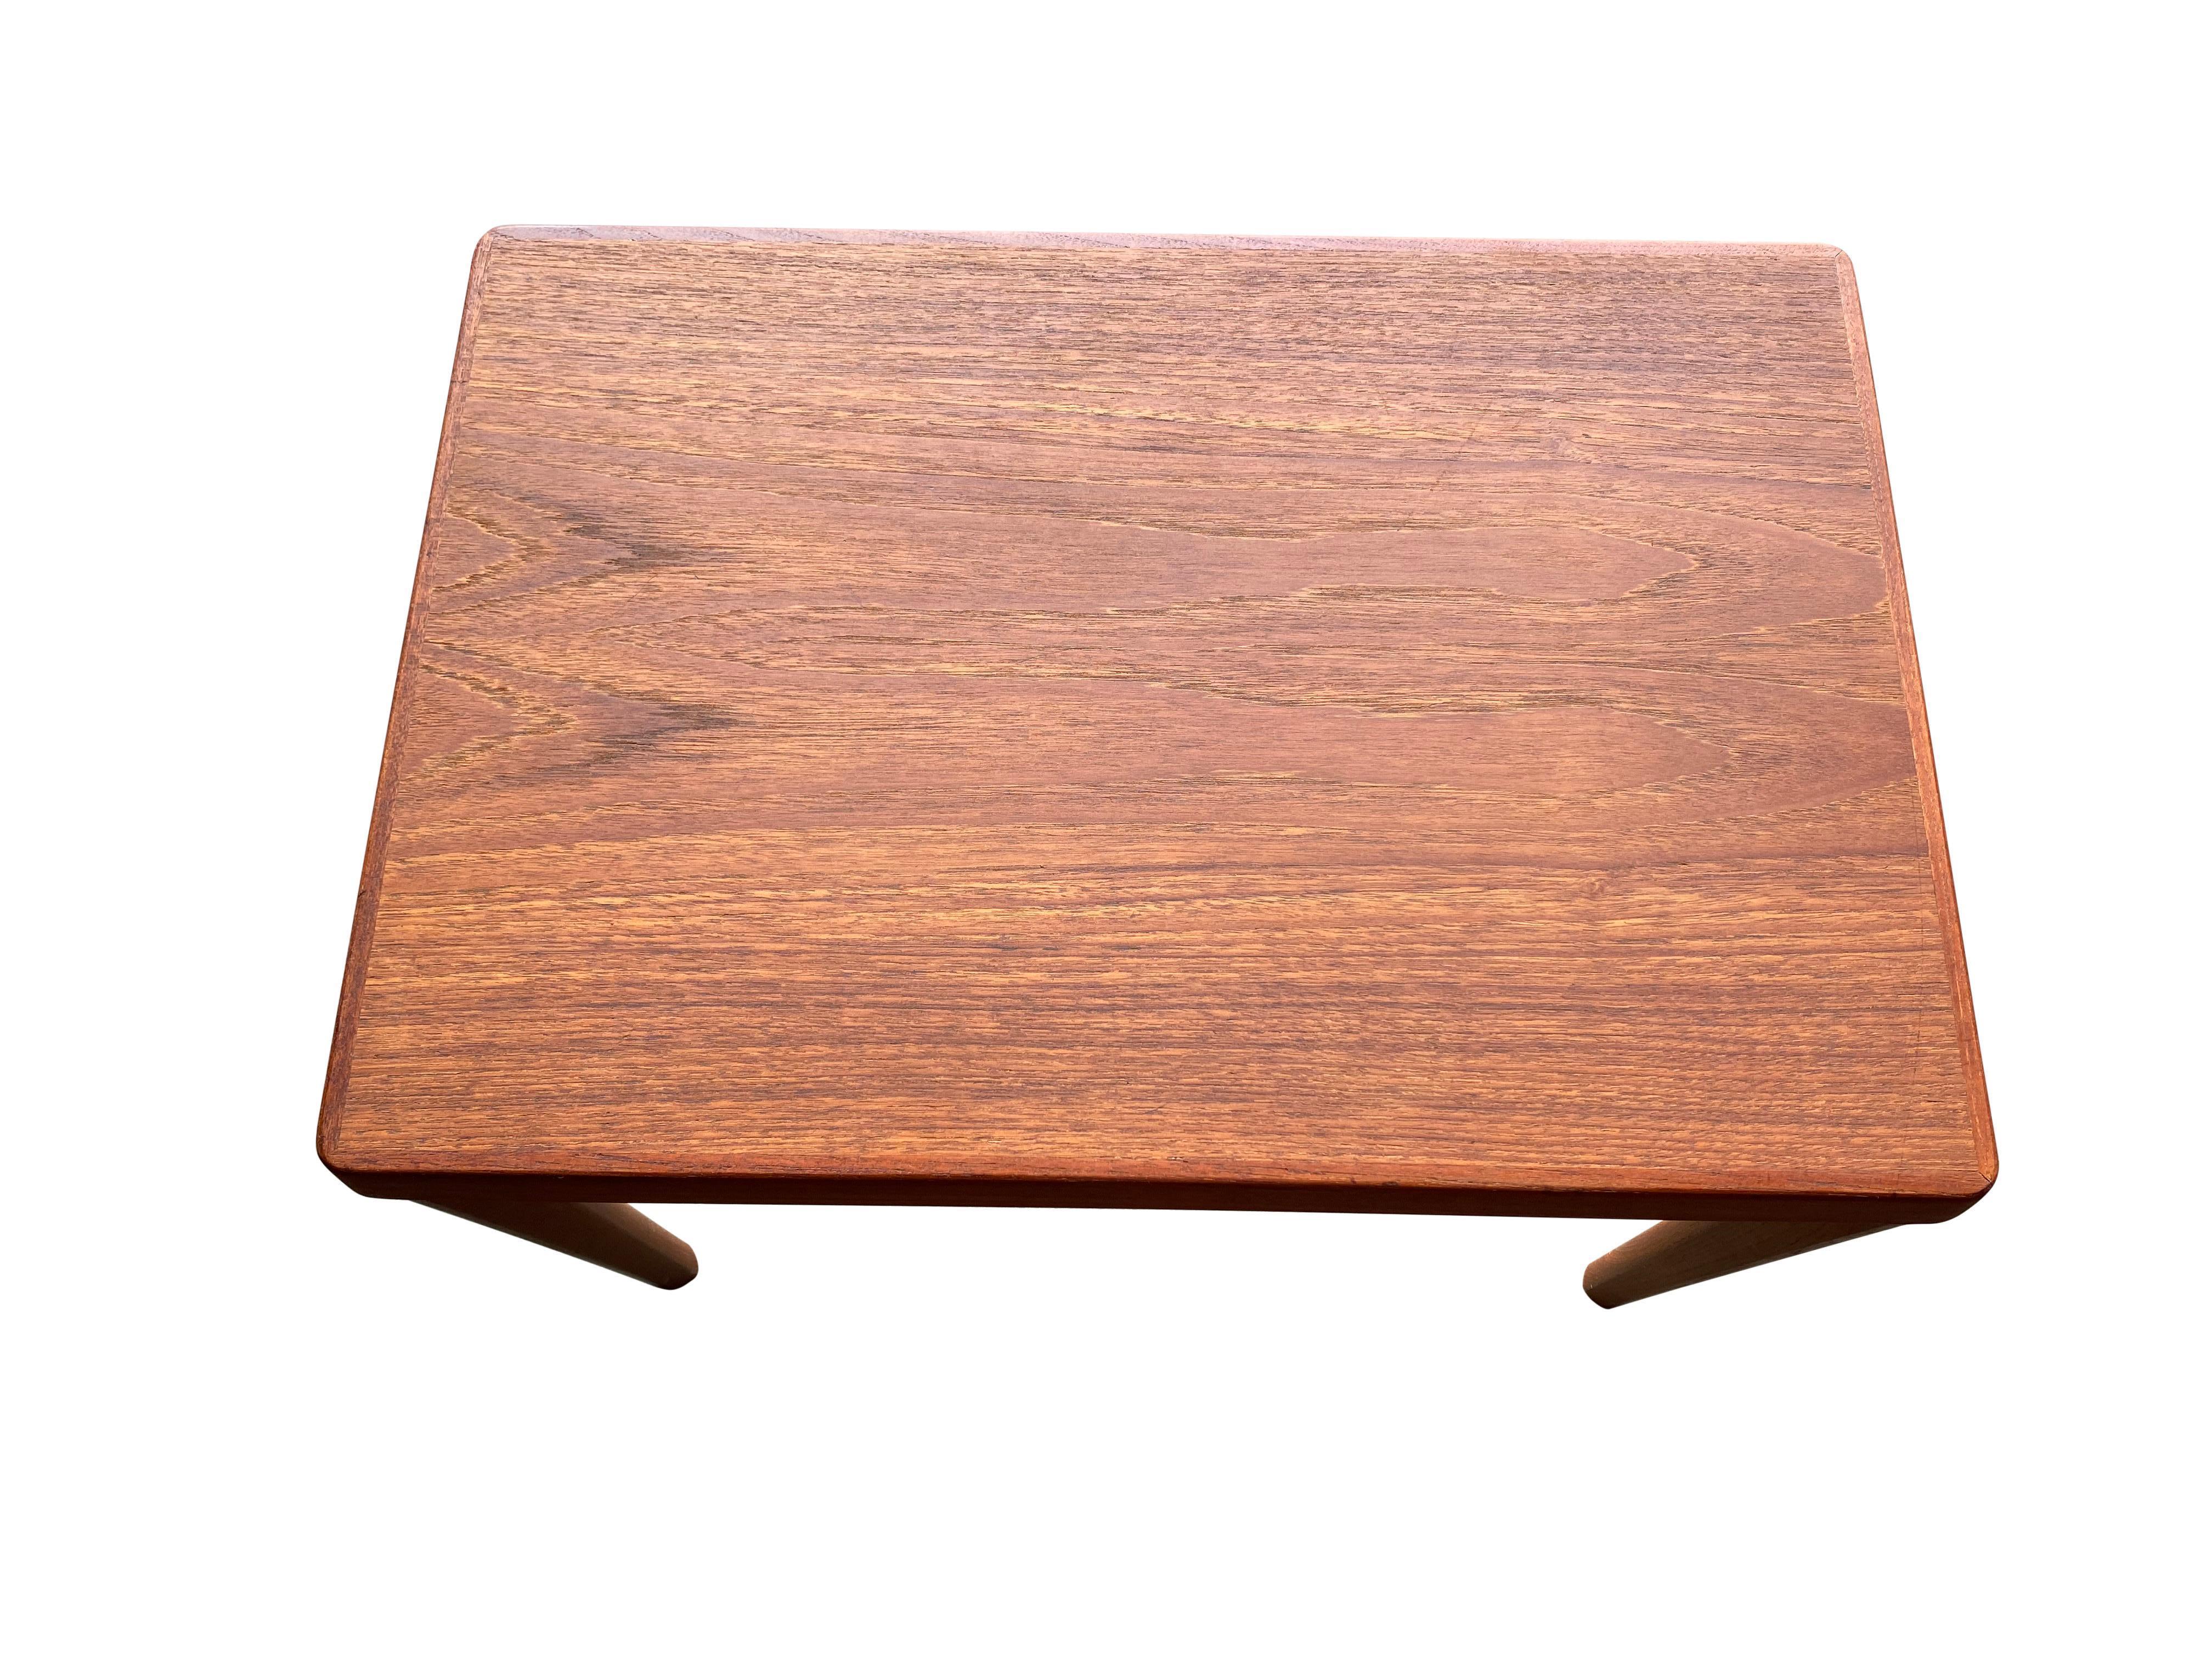 Elegant Danish modern side table executed in teak. Warm tones and attractive grains. Stamped Vejle Stole Møbelfabrik. Perfect for use as a nightstand or next to a sofa. Plenty of room for a lamp, vase, books, and a cup of coffee. In good condition